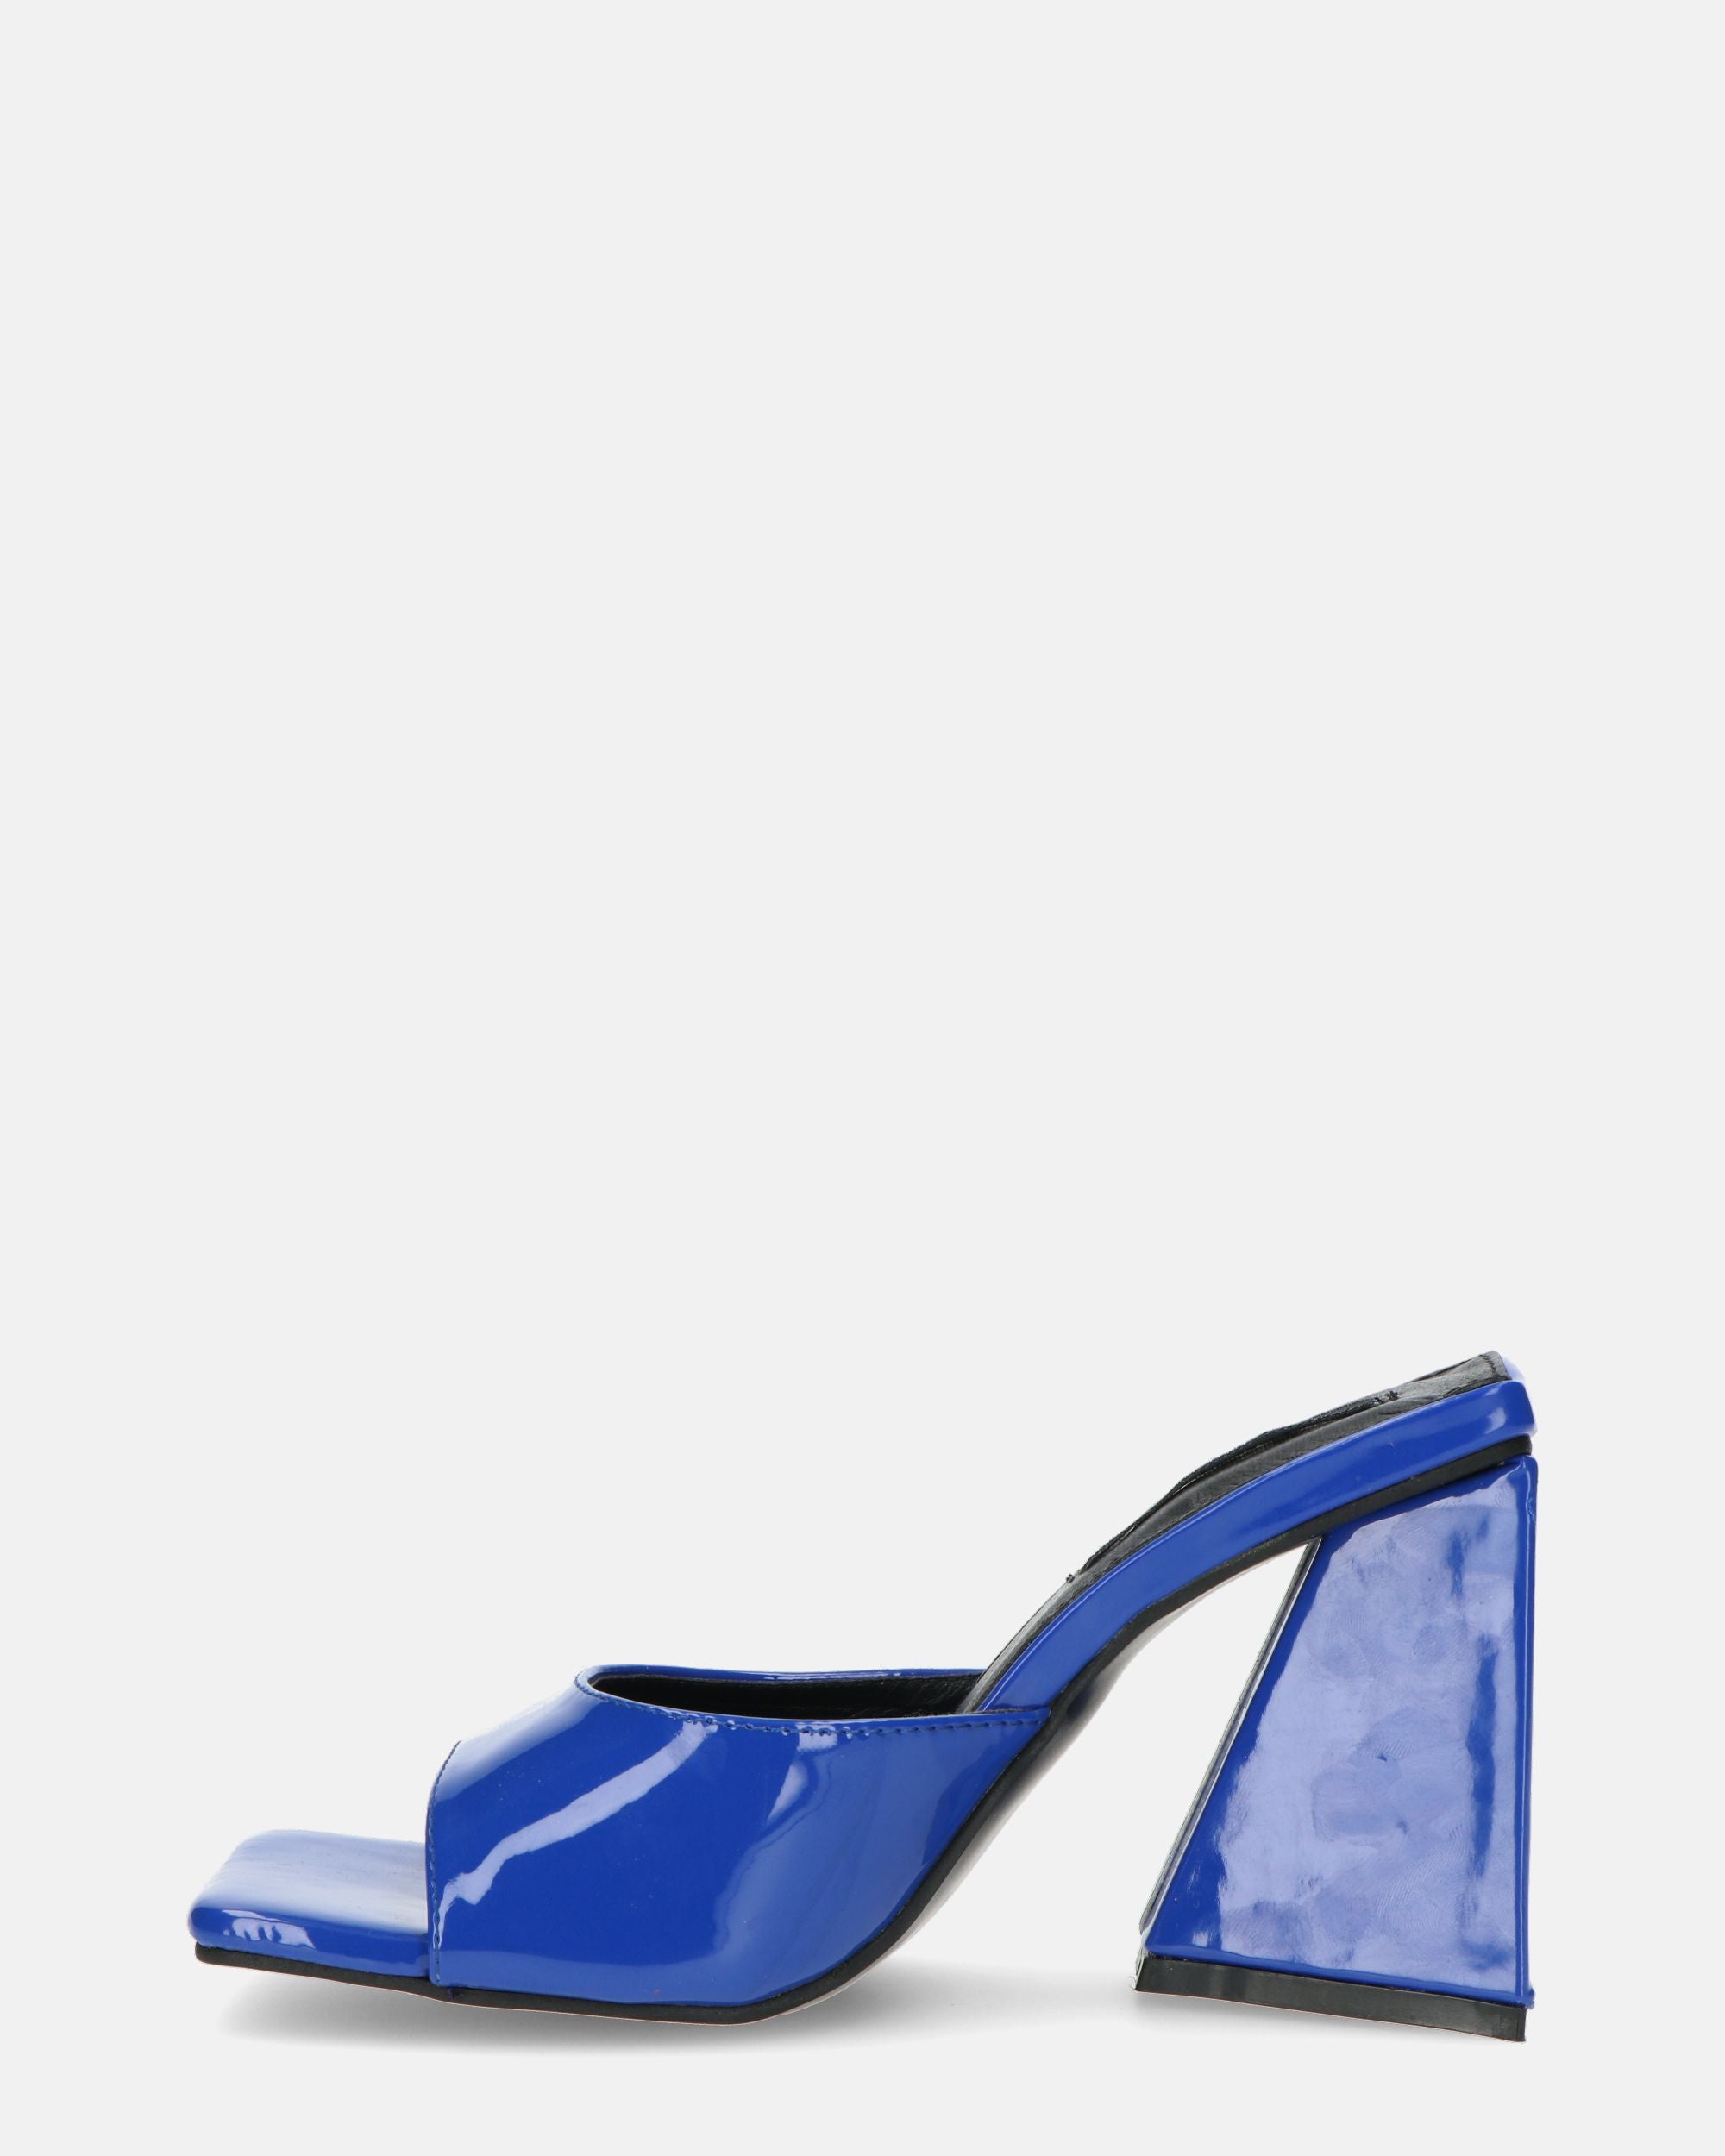 MILEY - blue glassy sandals with squared heel